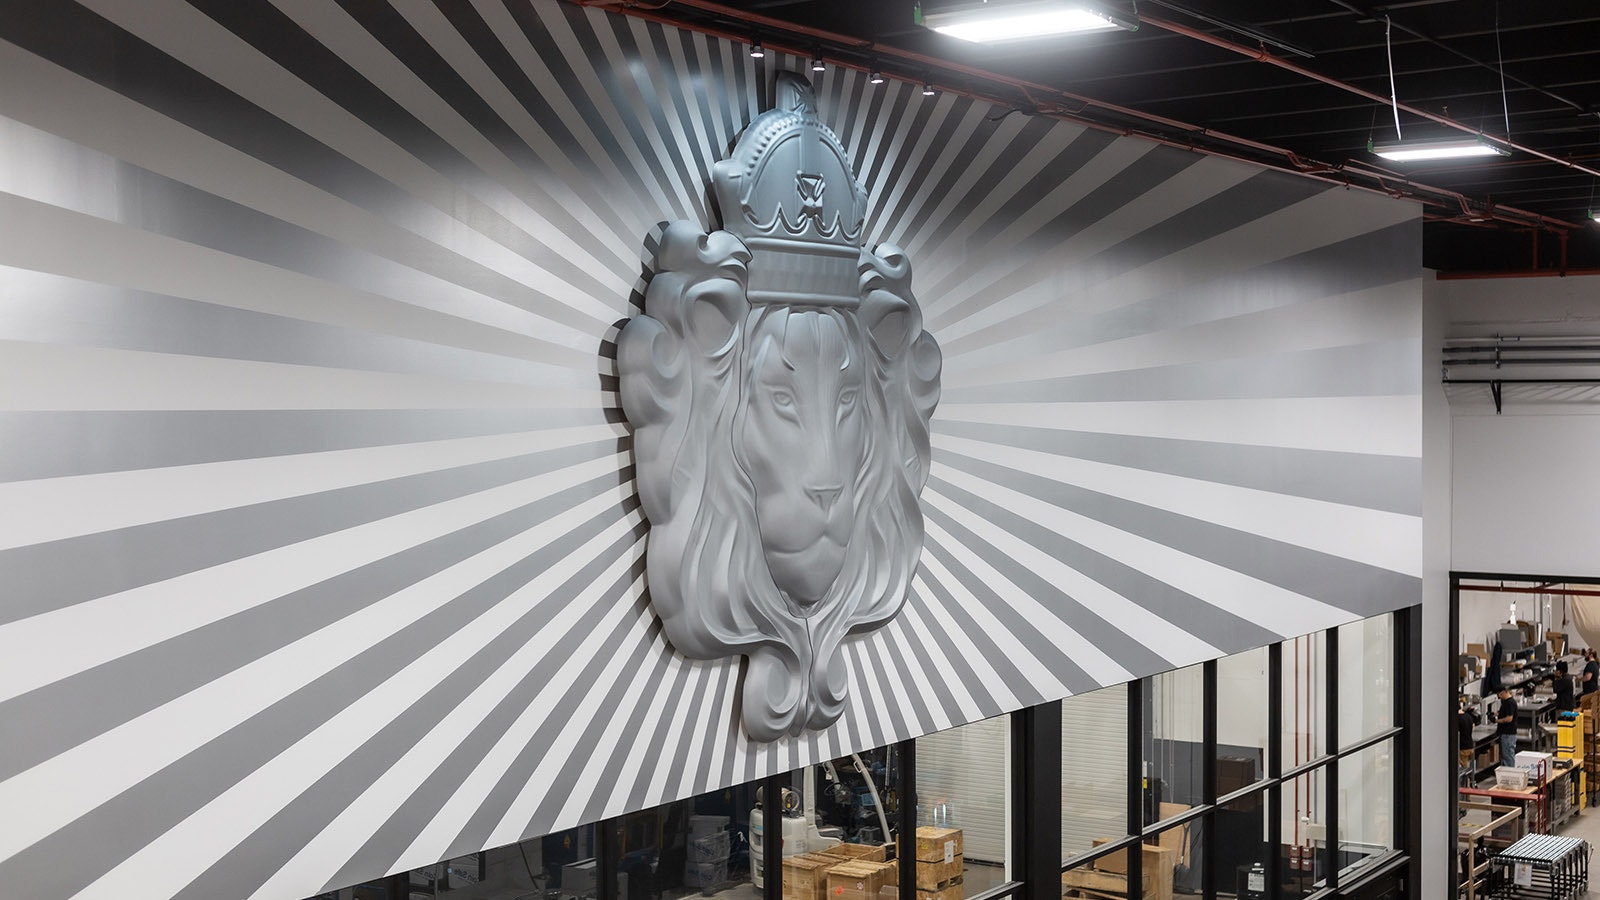 Scottsdale Mint’s logo is based on the biblical Lion of Judah and was chosen as a statement of founder Josh Phair’s faith.